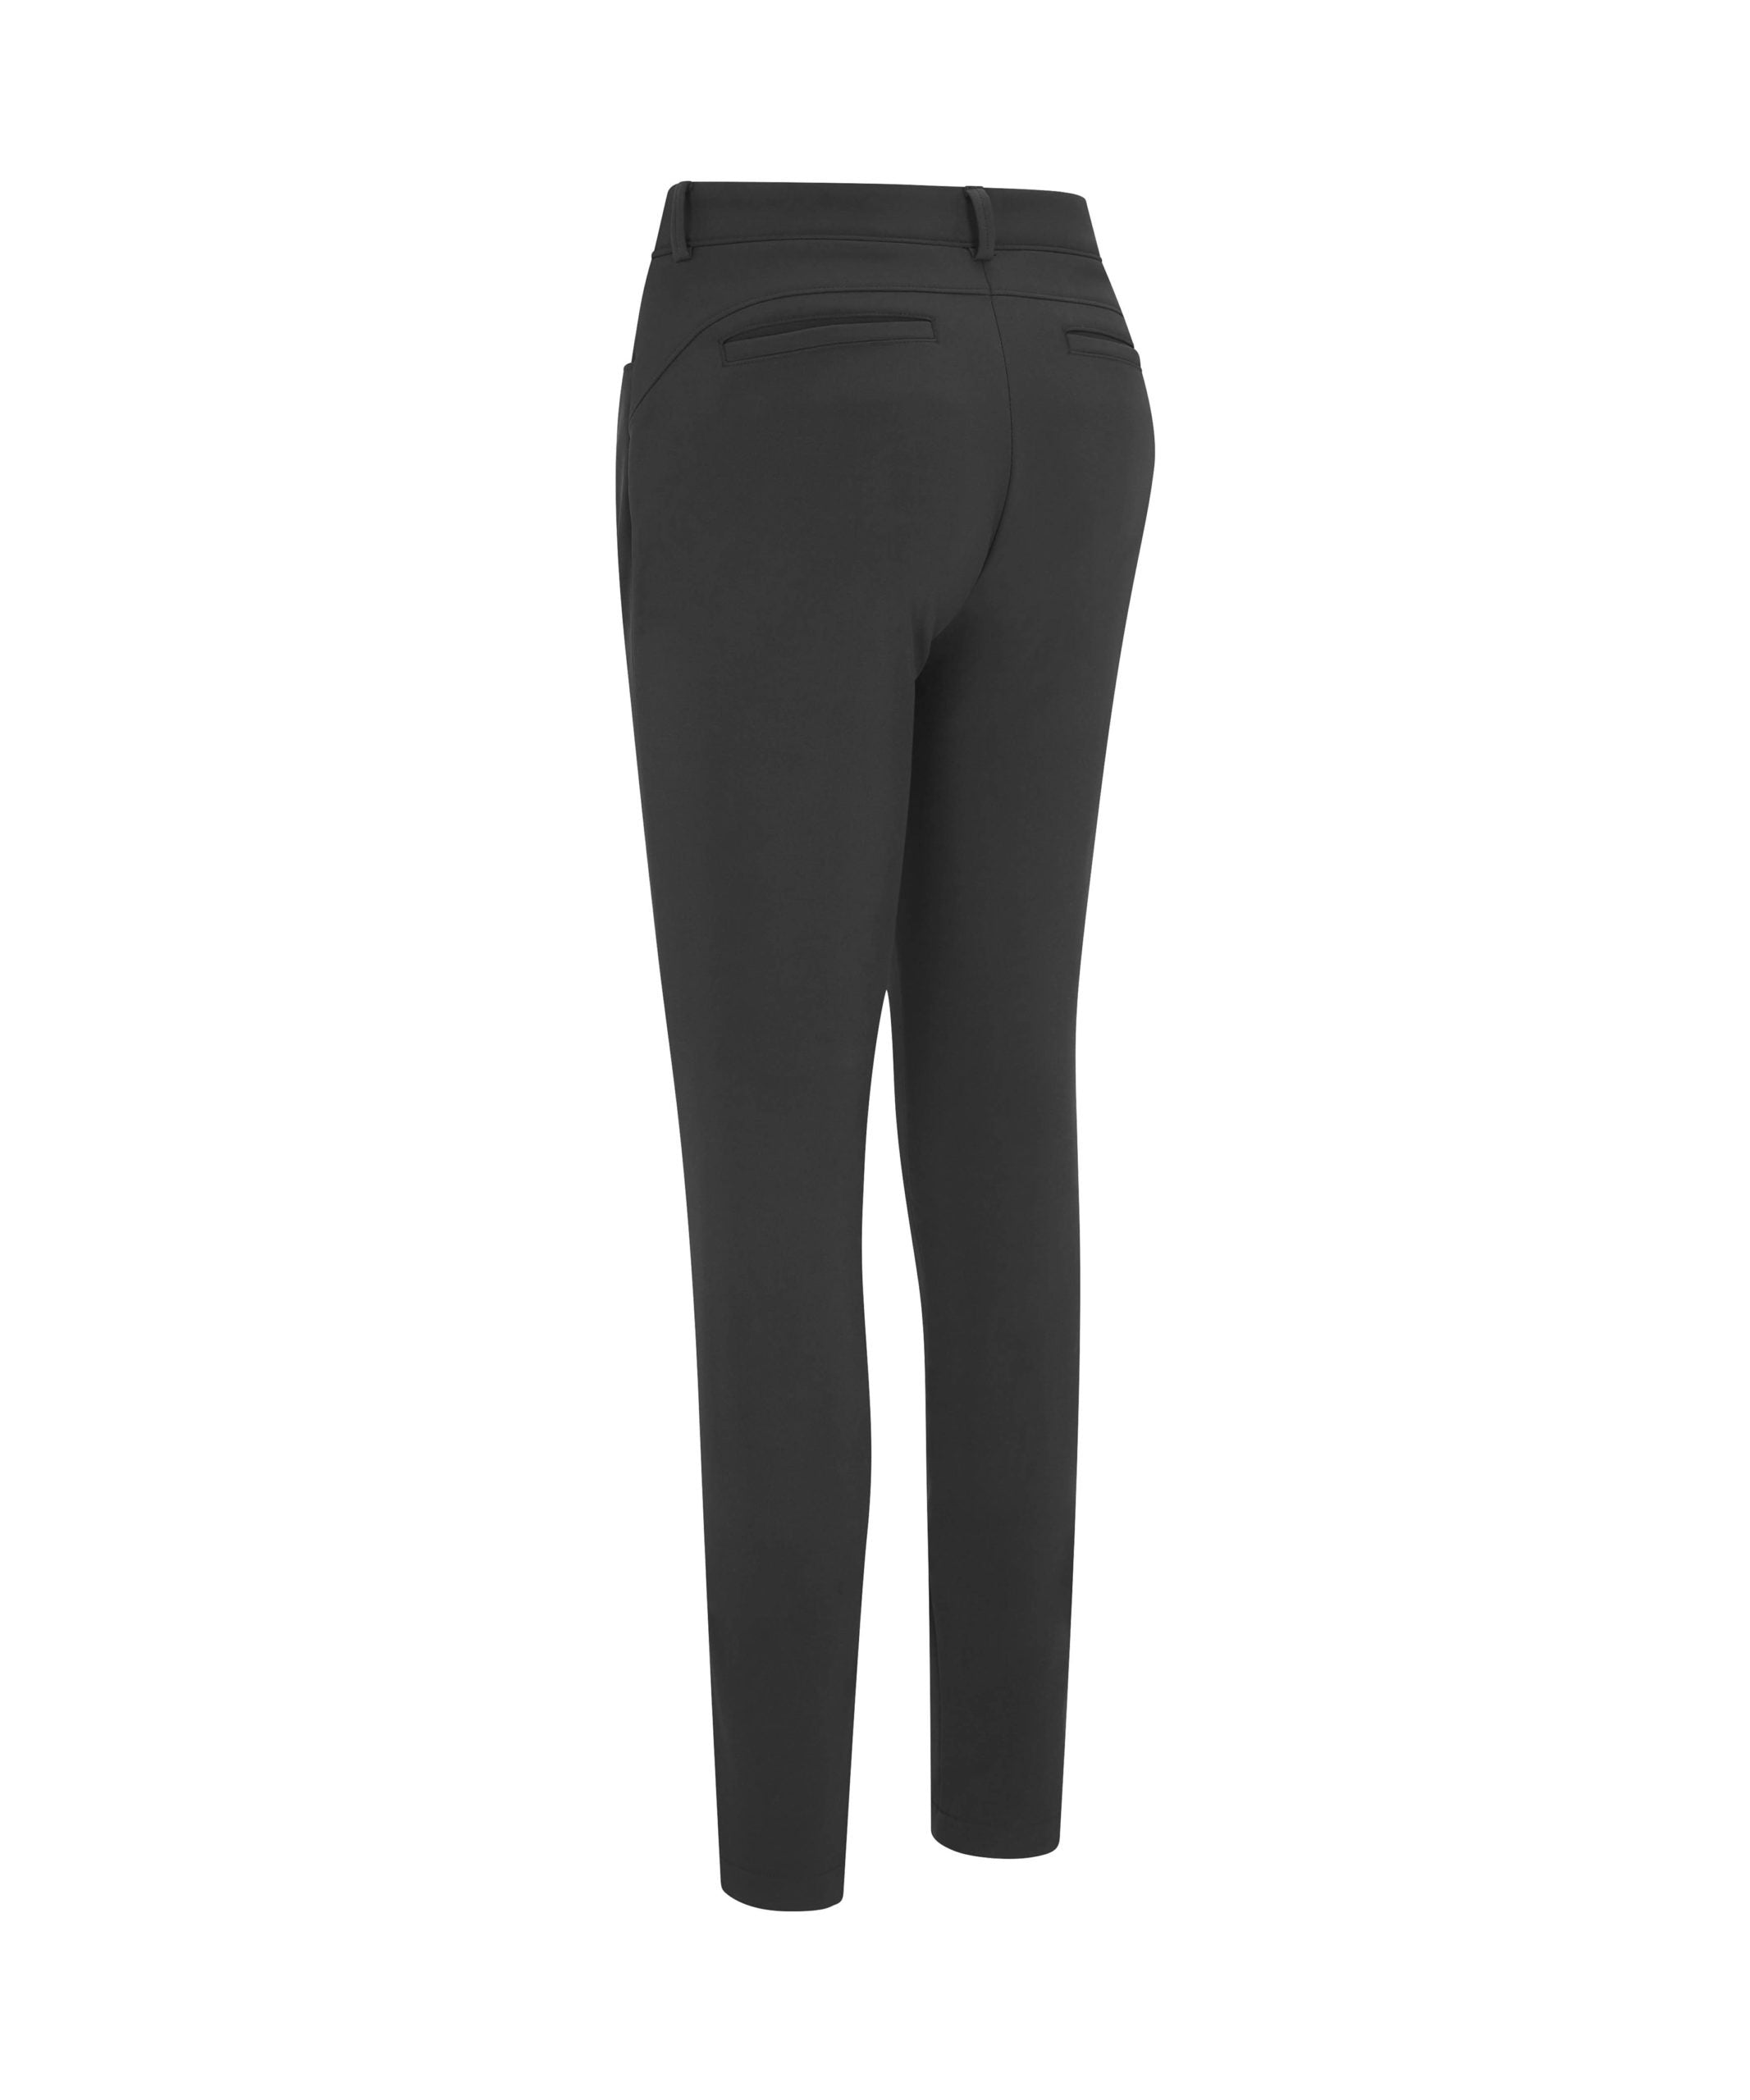 View Thermal Trousers In Caviar information